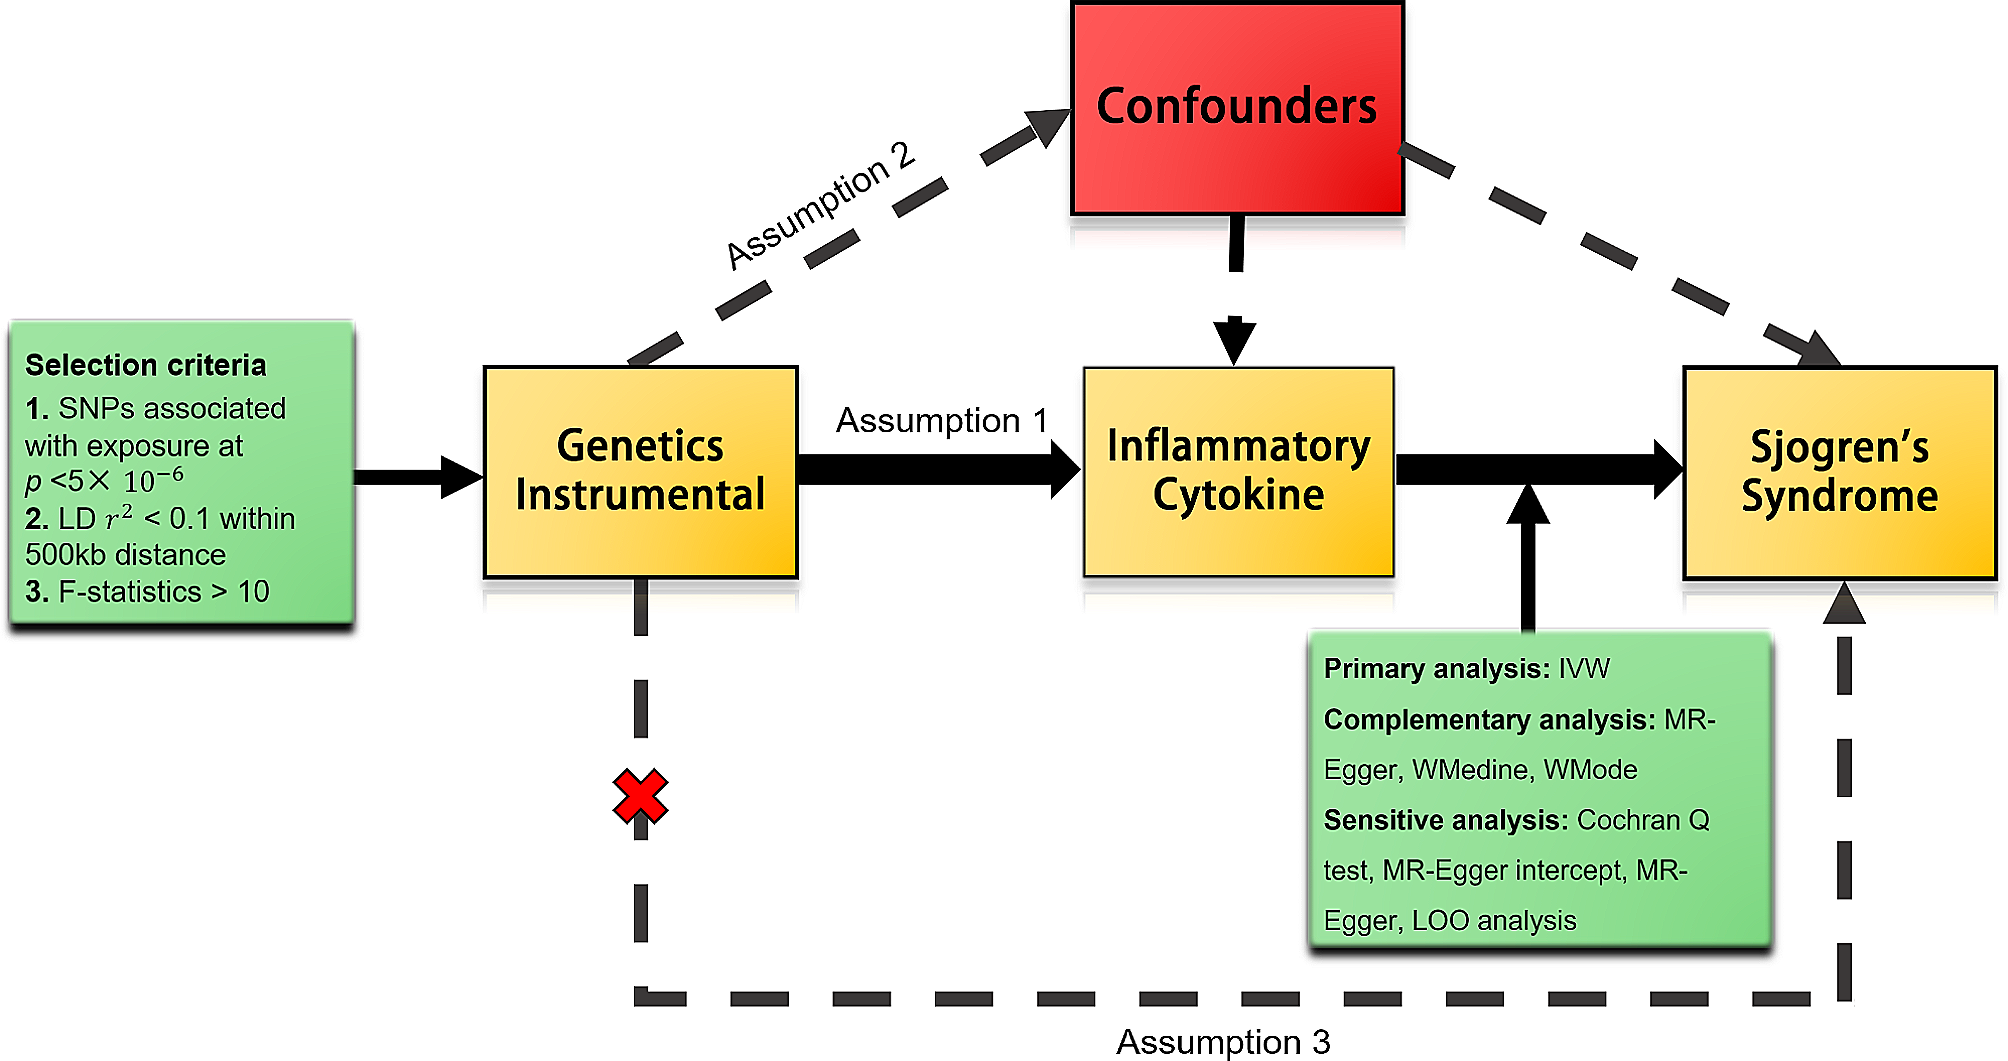 Inflammatory cytokines and their potential role in Sjogren’s syndrome risk: insights from a mendelian randomization study